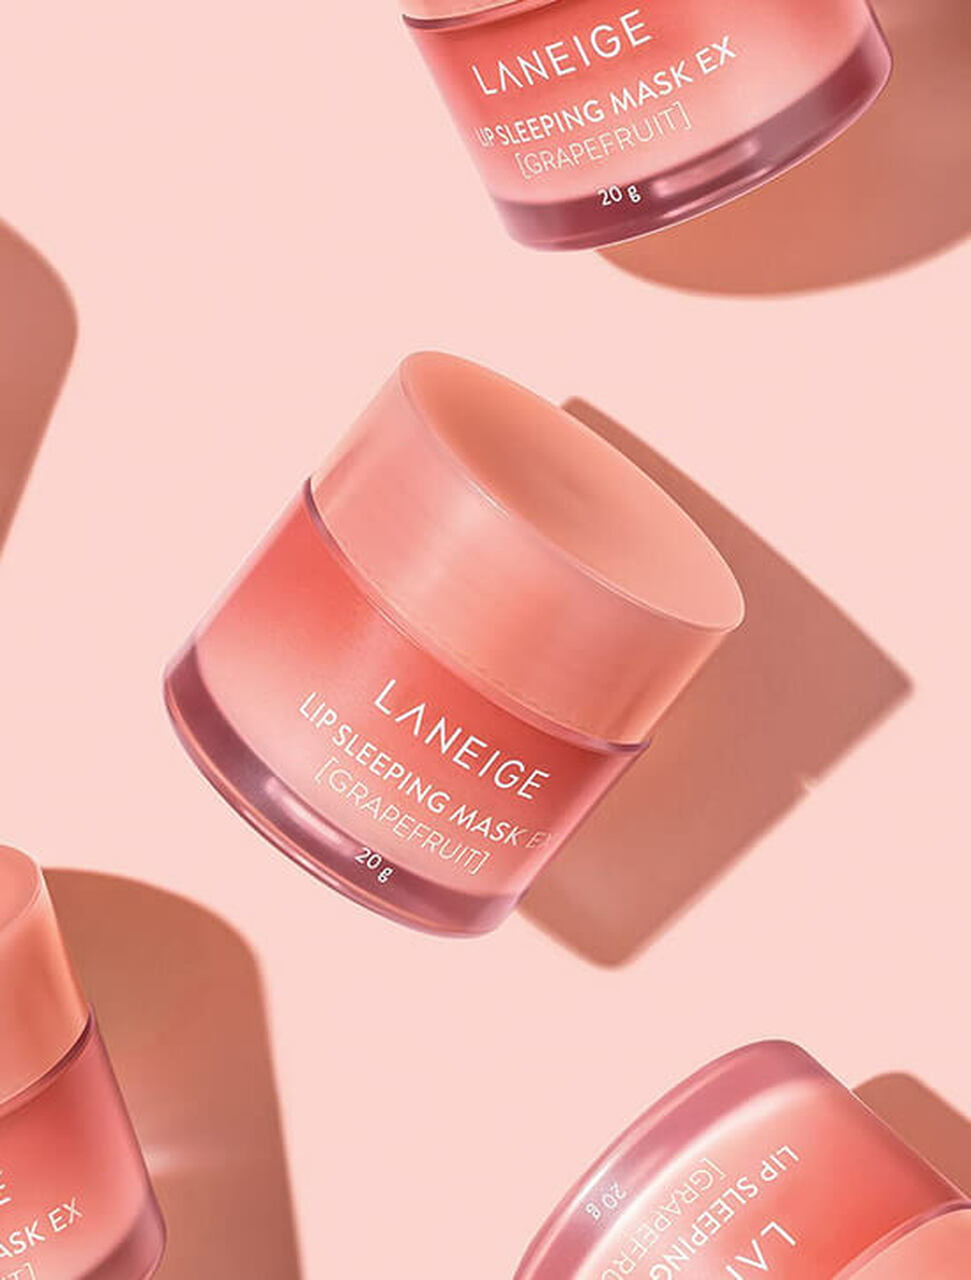 Lip night mask with grapefruit flavor by Laneige (Laneige Lip Sleeping Mask Grapefruit)